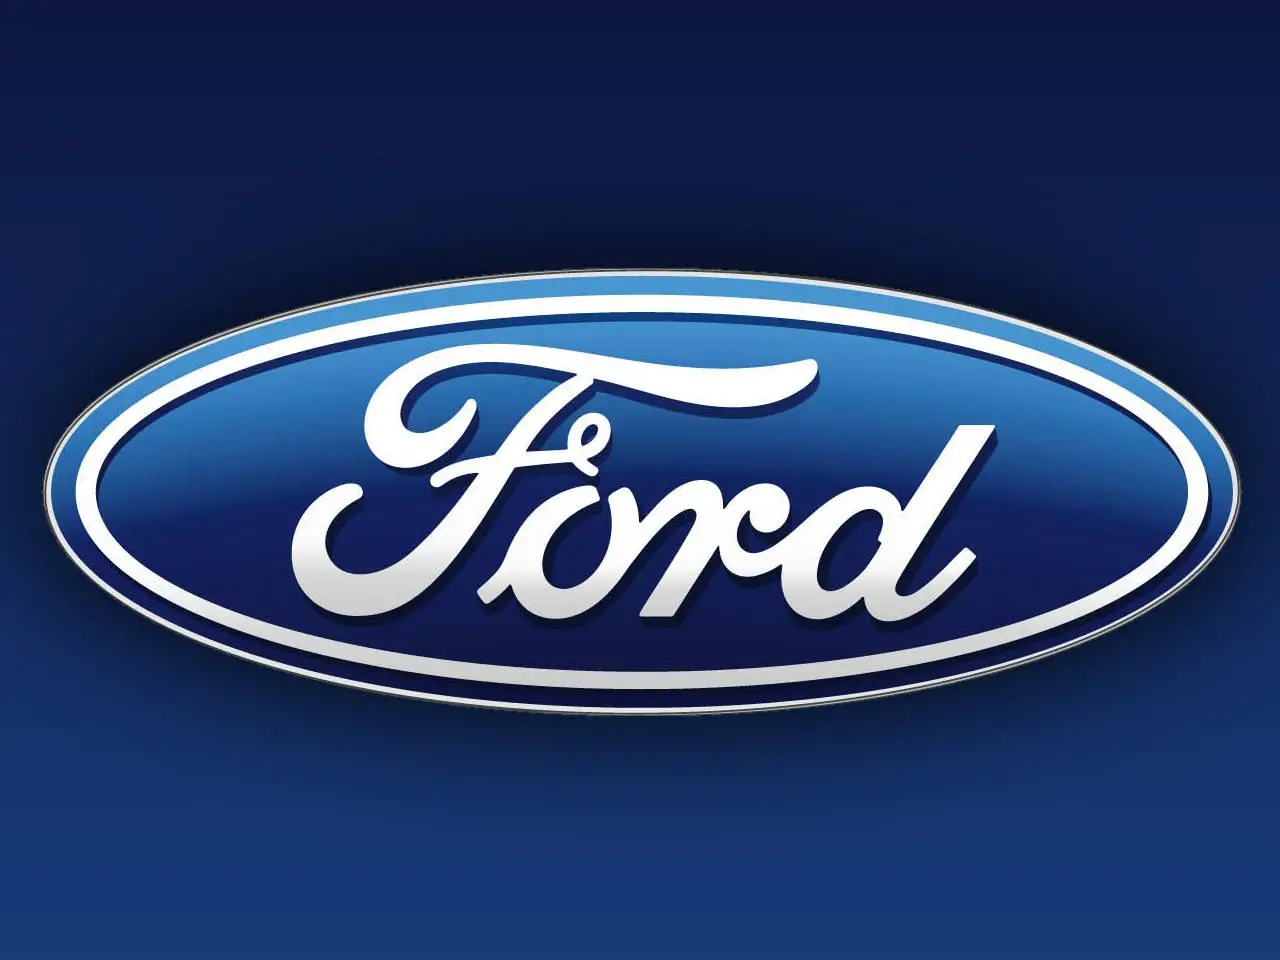 Ford Credit Earns $427 Million in the Third Quarter of 2009*